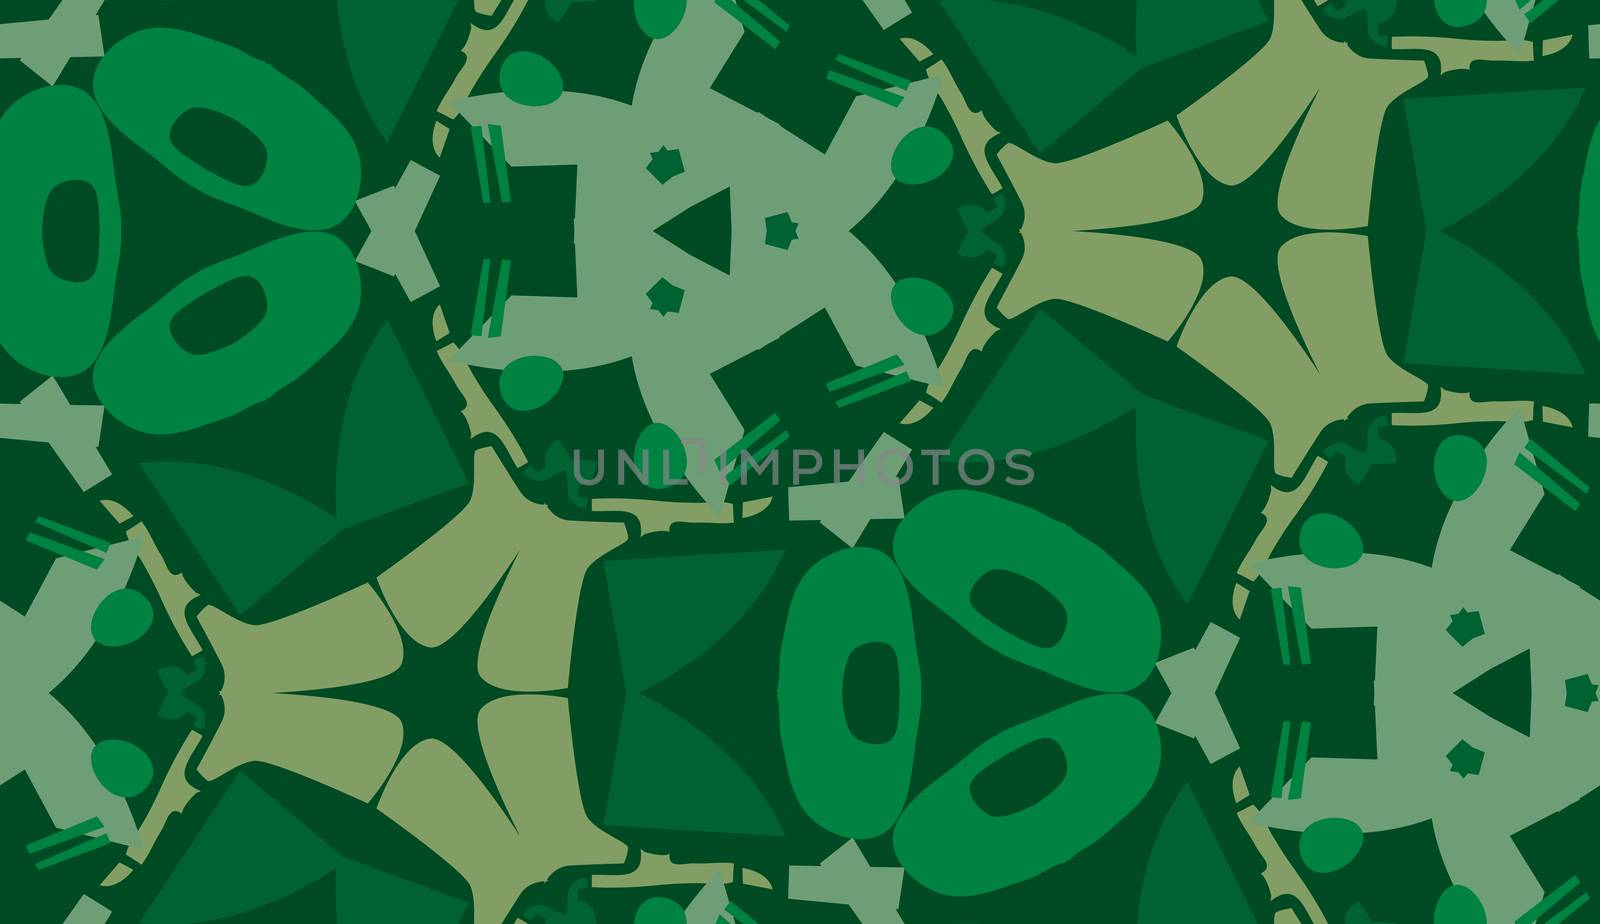 Repeating green shapes in repeating wallpaper pattern